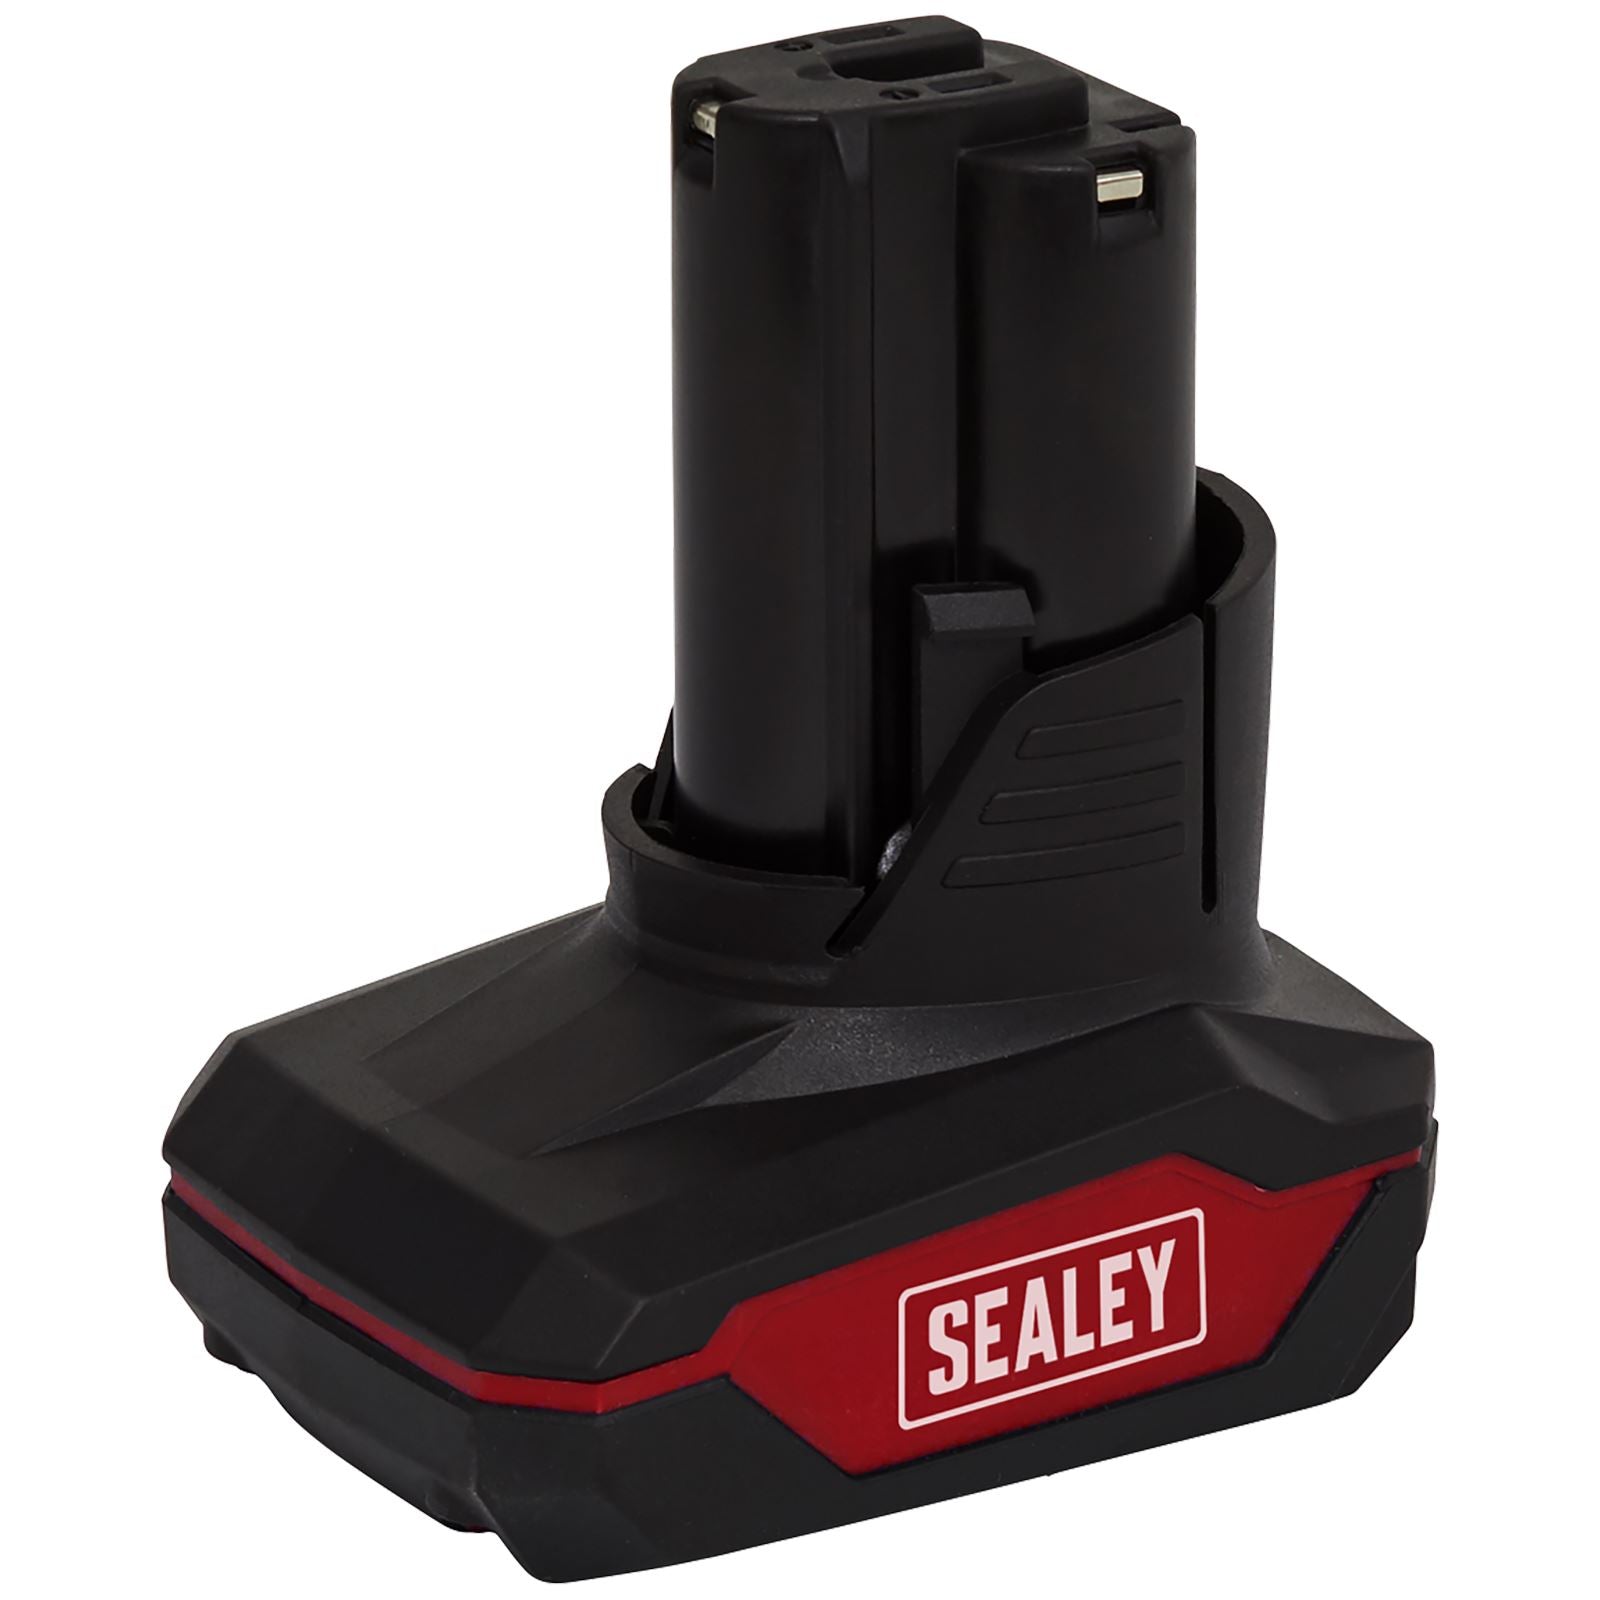 Sealey Power Tool Battery 12V 4Ah Lithium-ion for SV12 Series